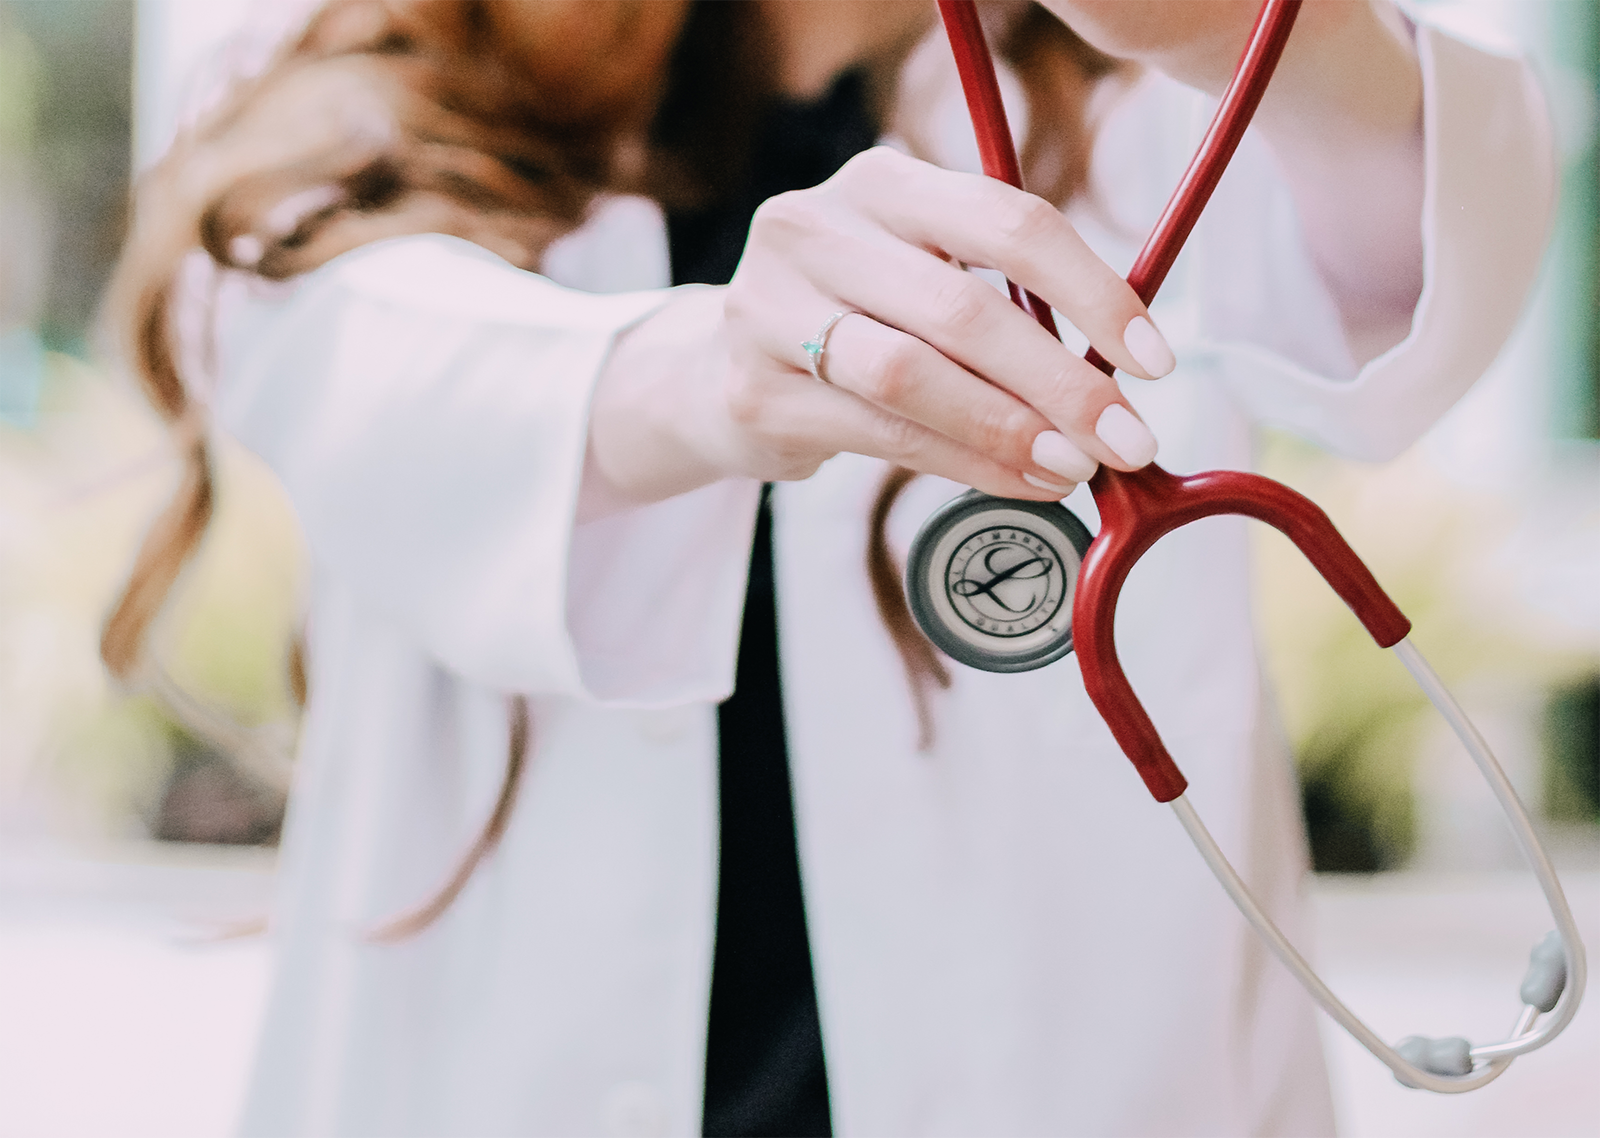 Red headed female doctor holding a red stethoscope in hand.